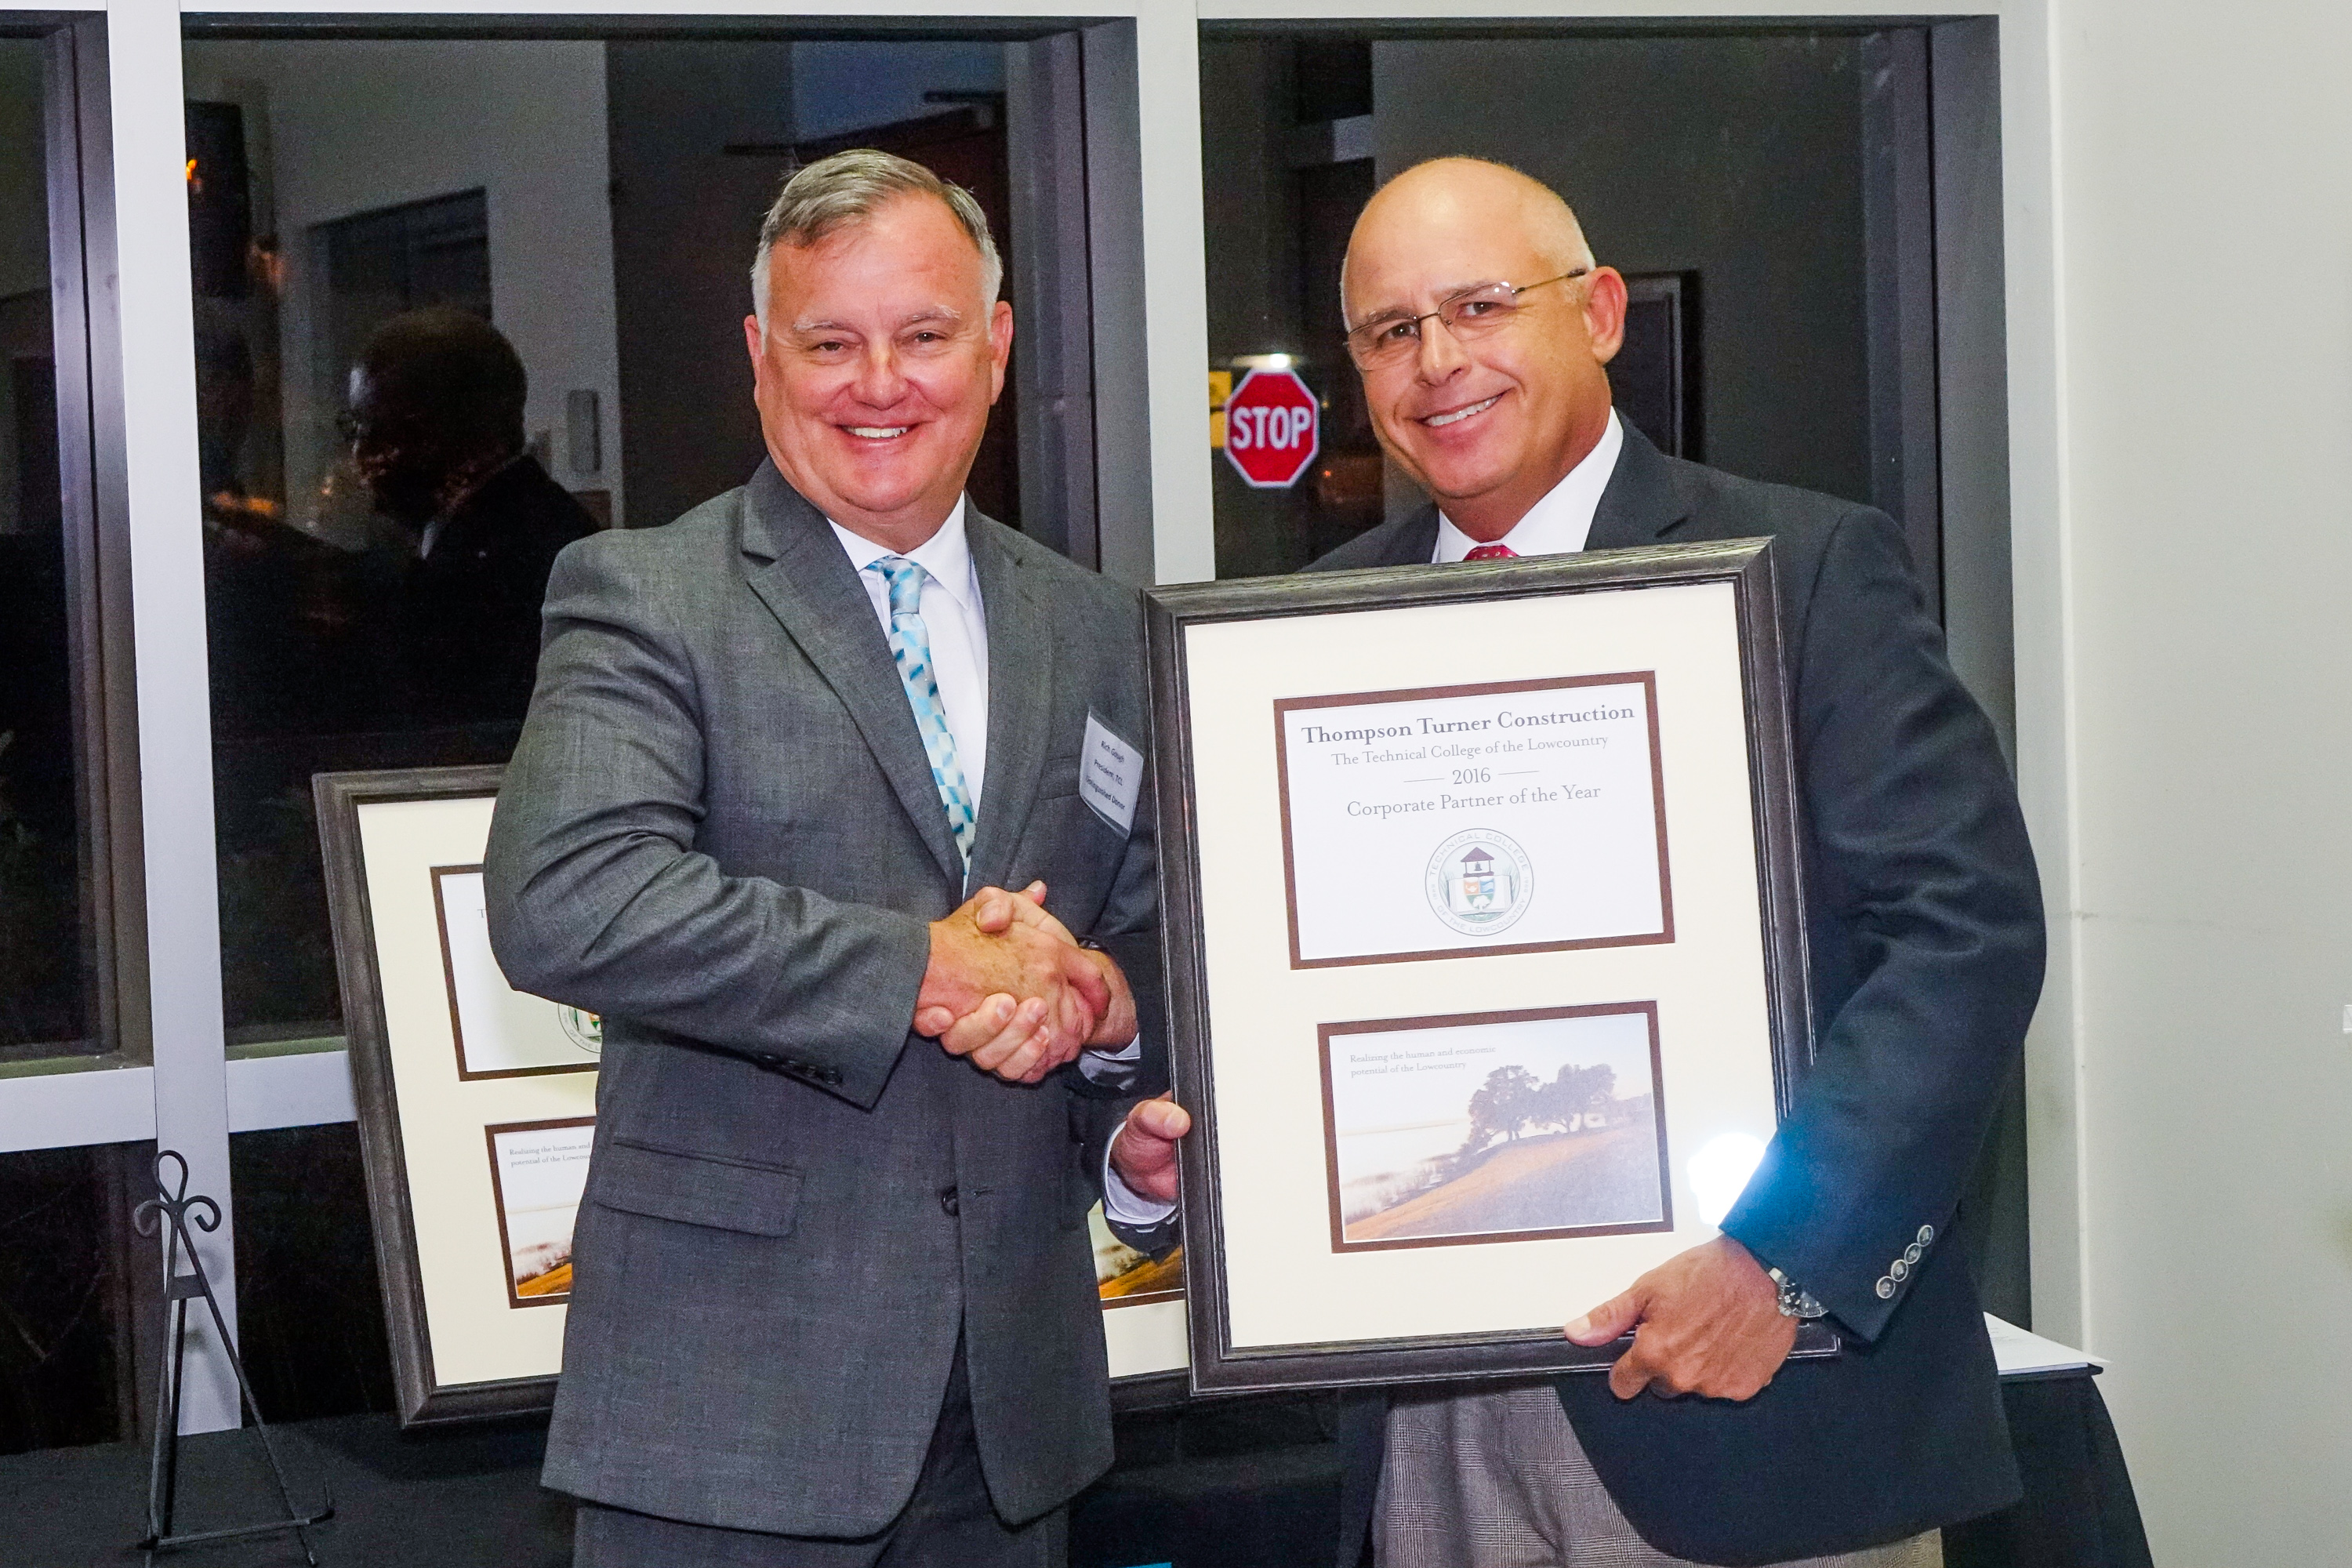 Photo-Thompson Turner Construction-TCL Corporate Partner of the Year (Mr. Hal Turner, pictured)